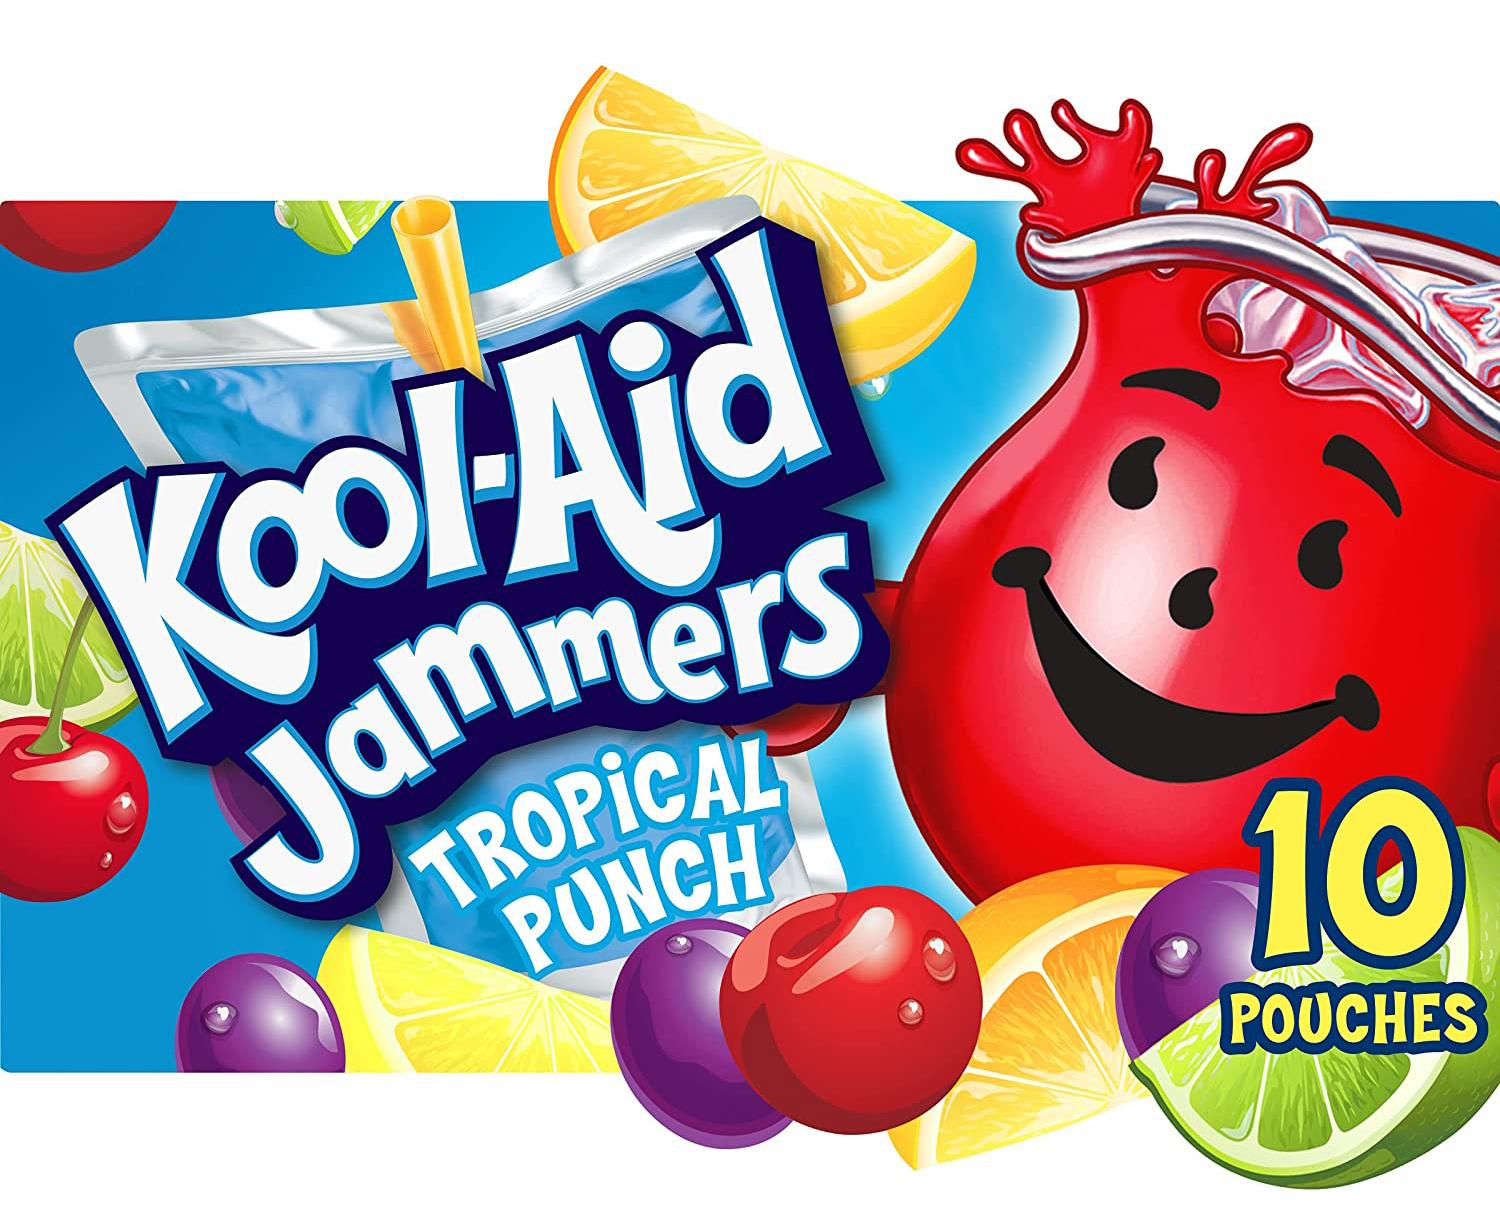 Kool-Aid Jammers Tropical Punch Juice Drink 40 Pouches for $2.68 Shipped